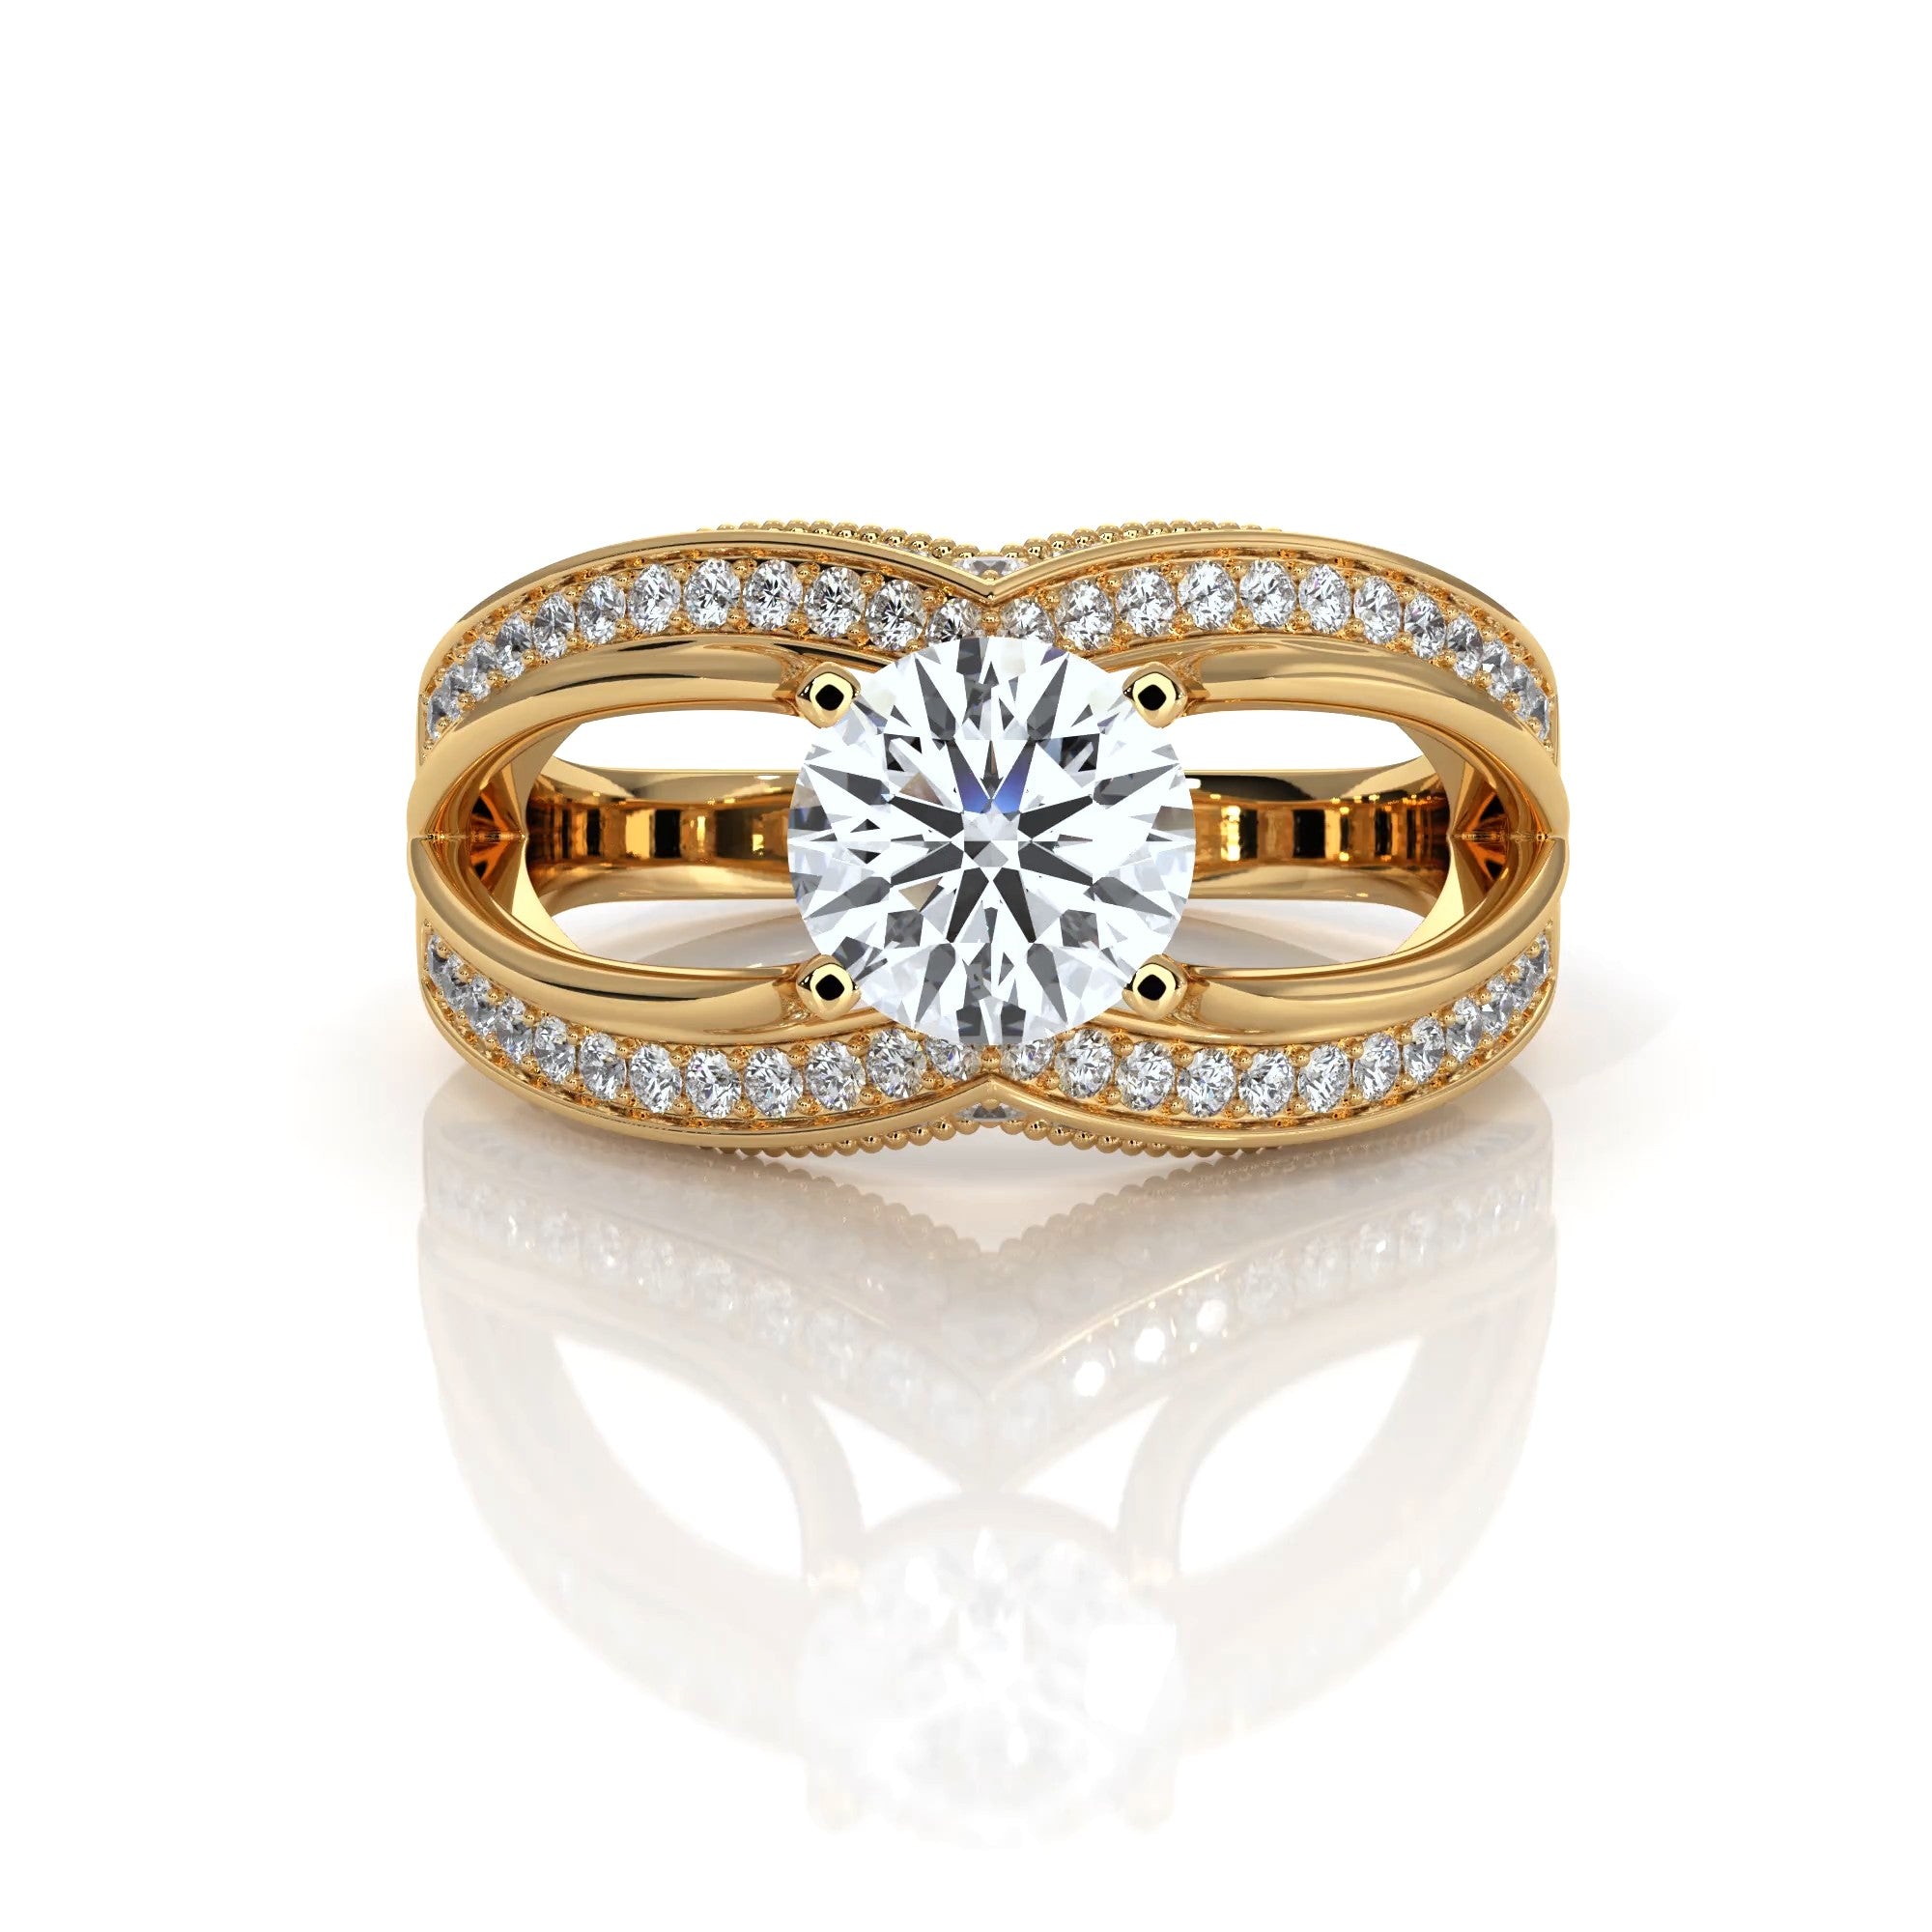 Panache Solitaire Ring